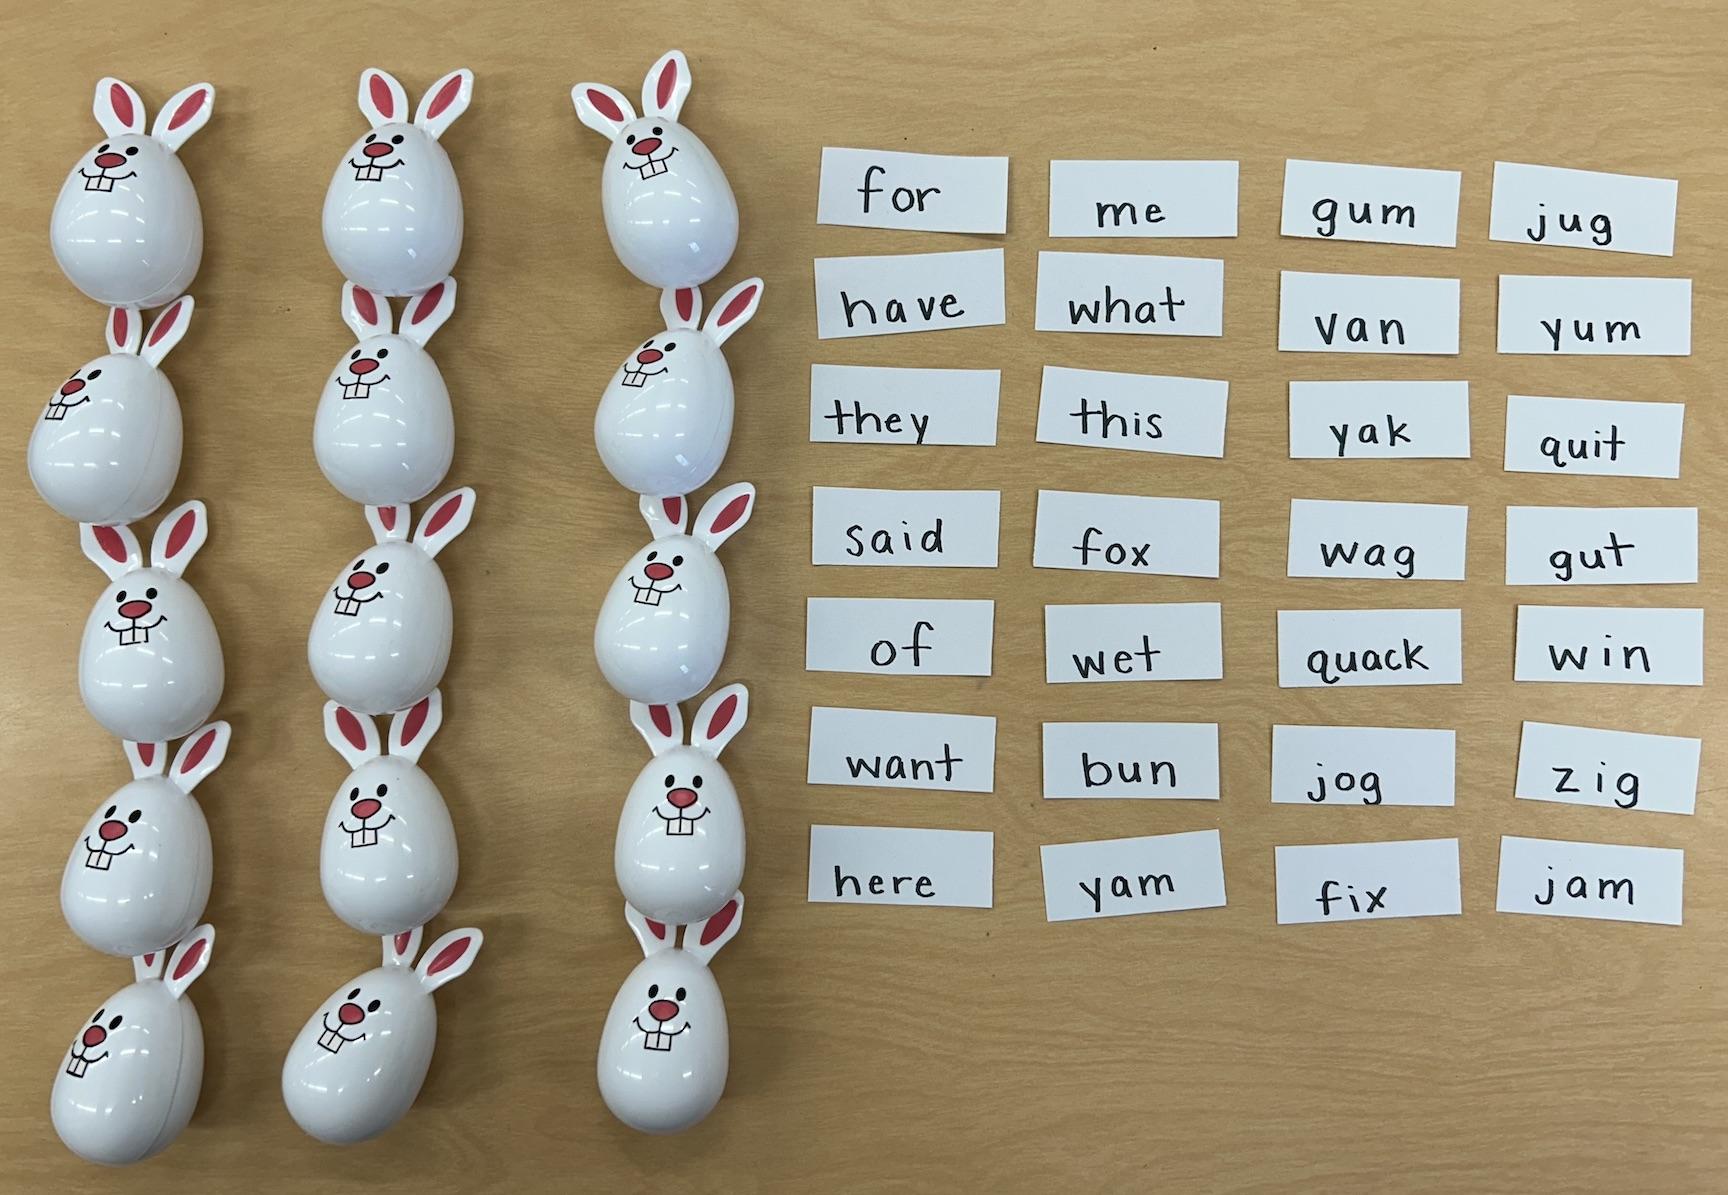 the bunny eggs with the words which were hidden inside